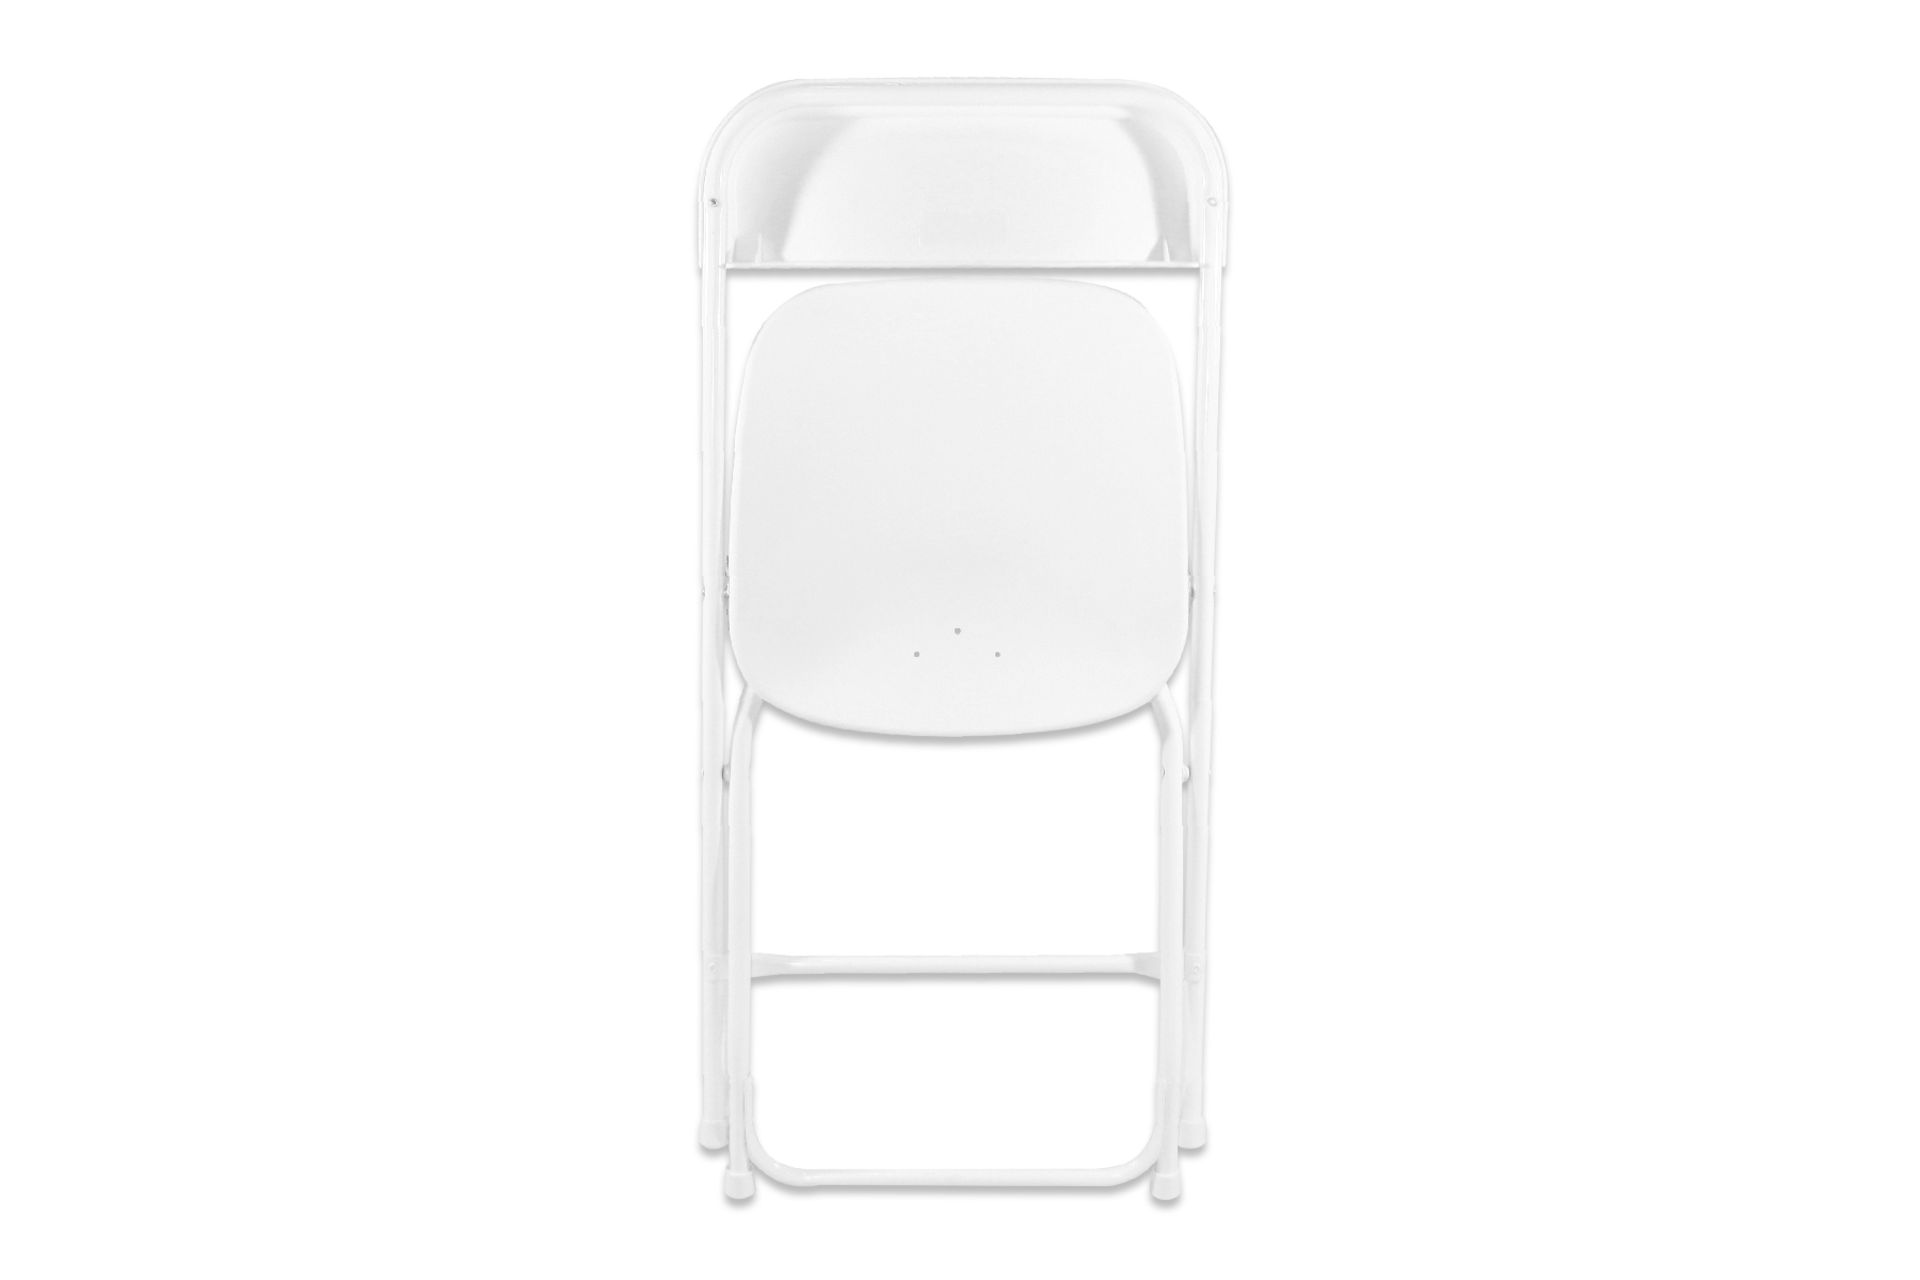 V *TRADE QTY* Grade A Folding Plastic Chair - White X1800 YOUR BID PRICE TO BE MULTIPLIED - Image 3 of 6